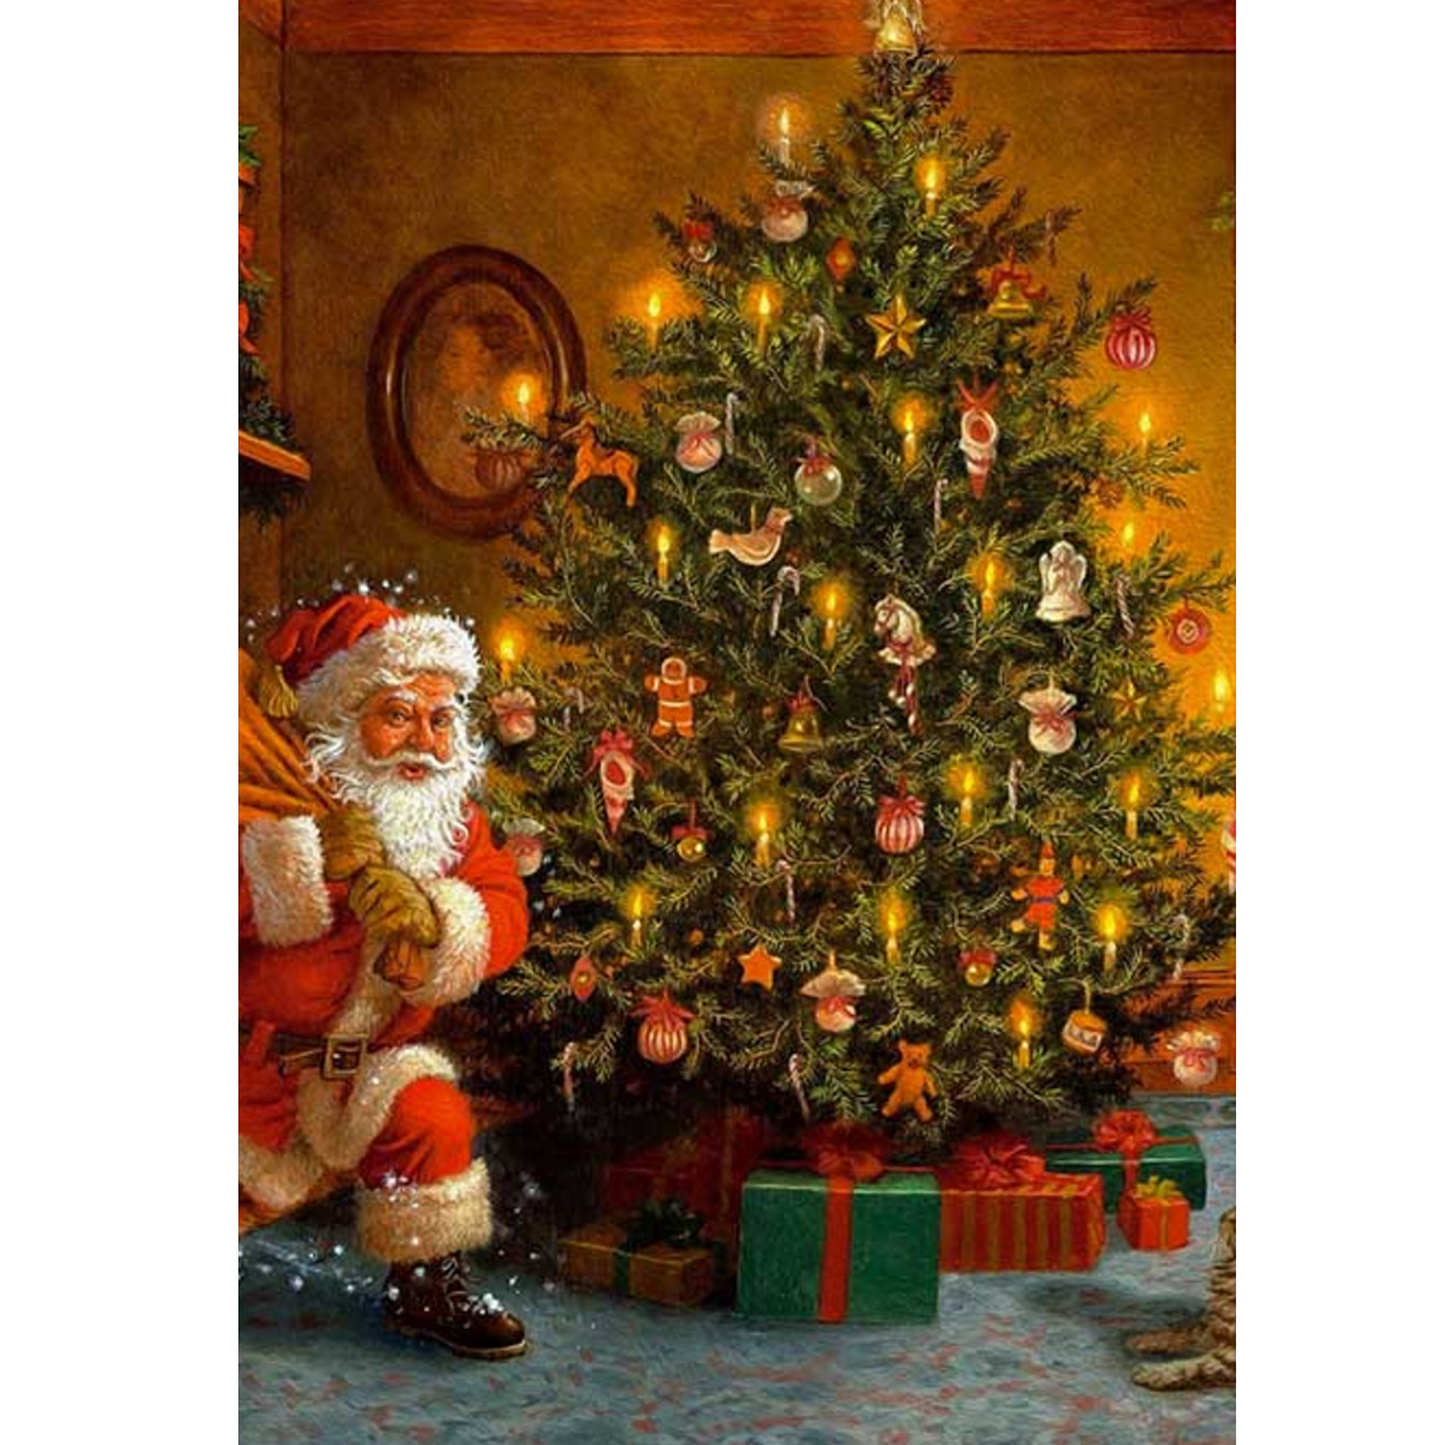 "Santa at the Tree" decoupage rice paper by Paper Designs. Available at Milton's Daughter.